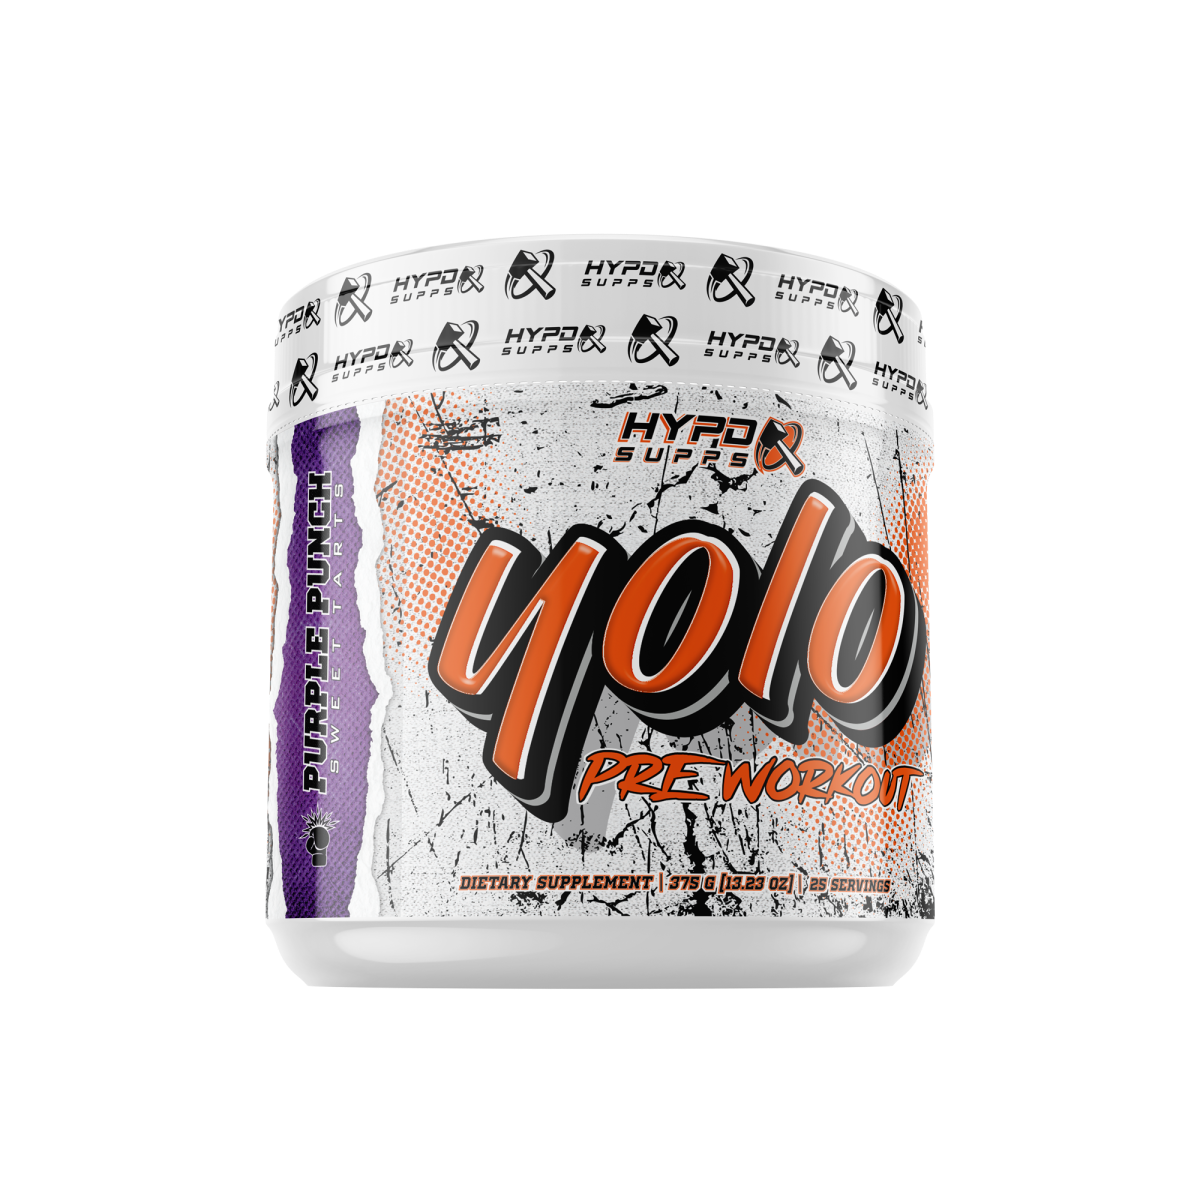 Hypd Supps- YOLO